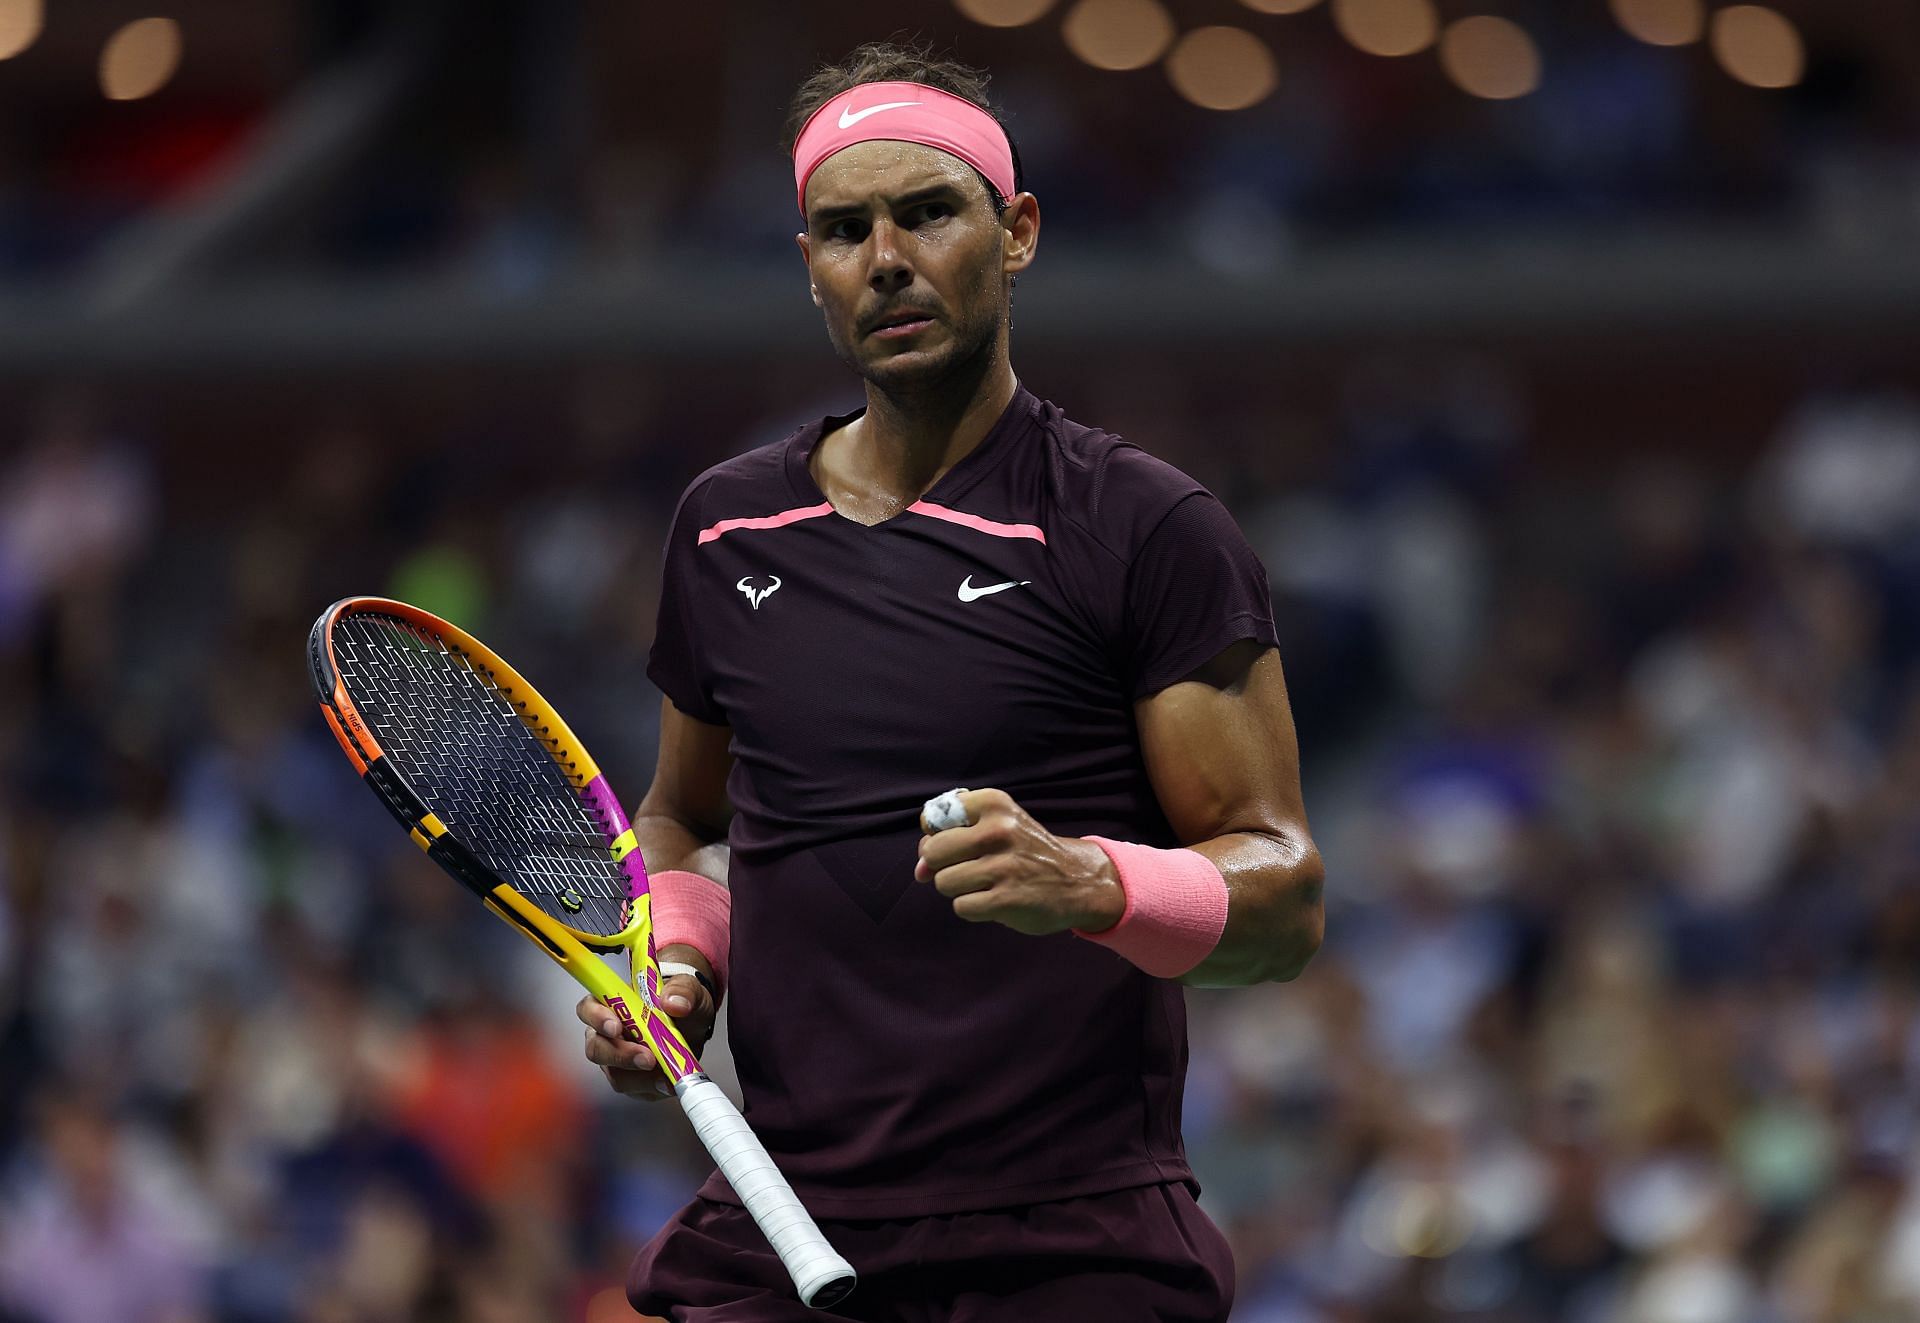 Rafael Nadal has made it to the third round of the 2022 US Open.